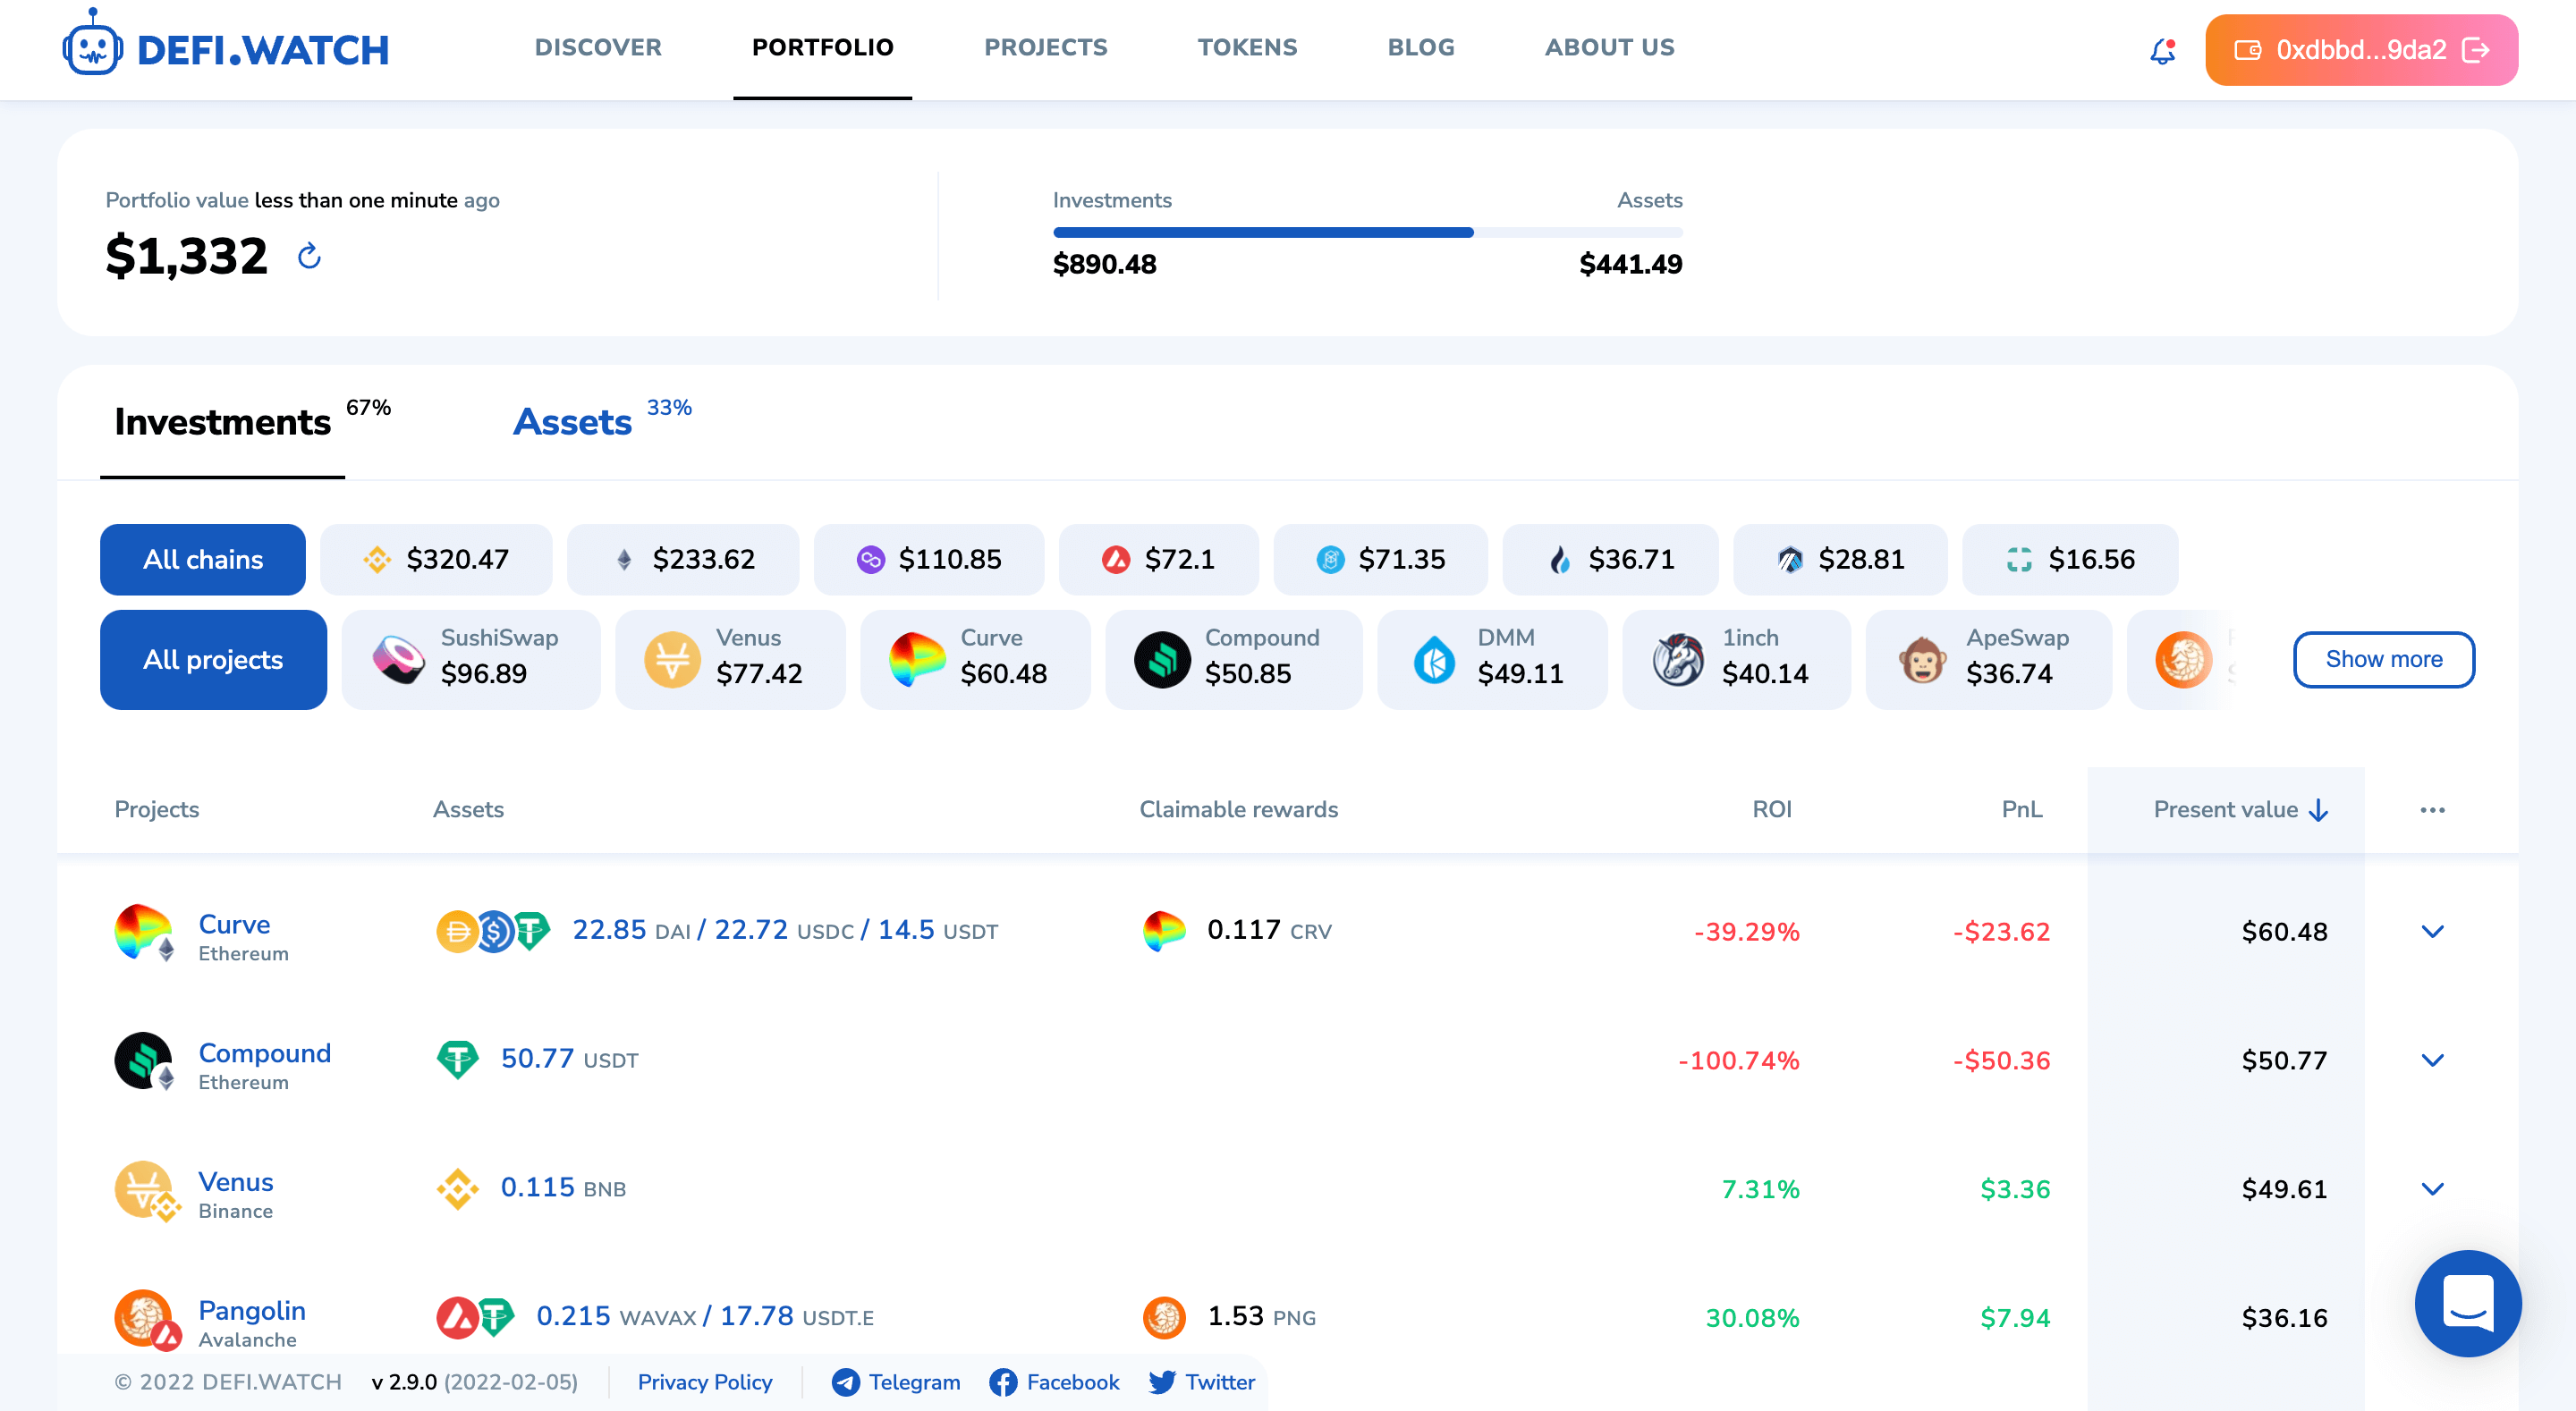 The Defi Watch allows users to connect their wallet to track assets and get advanced analytics on their investments